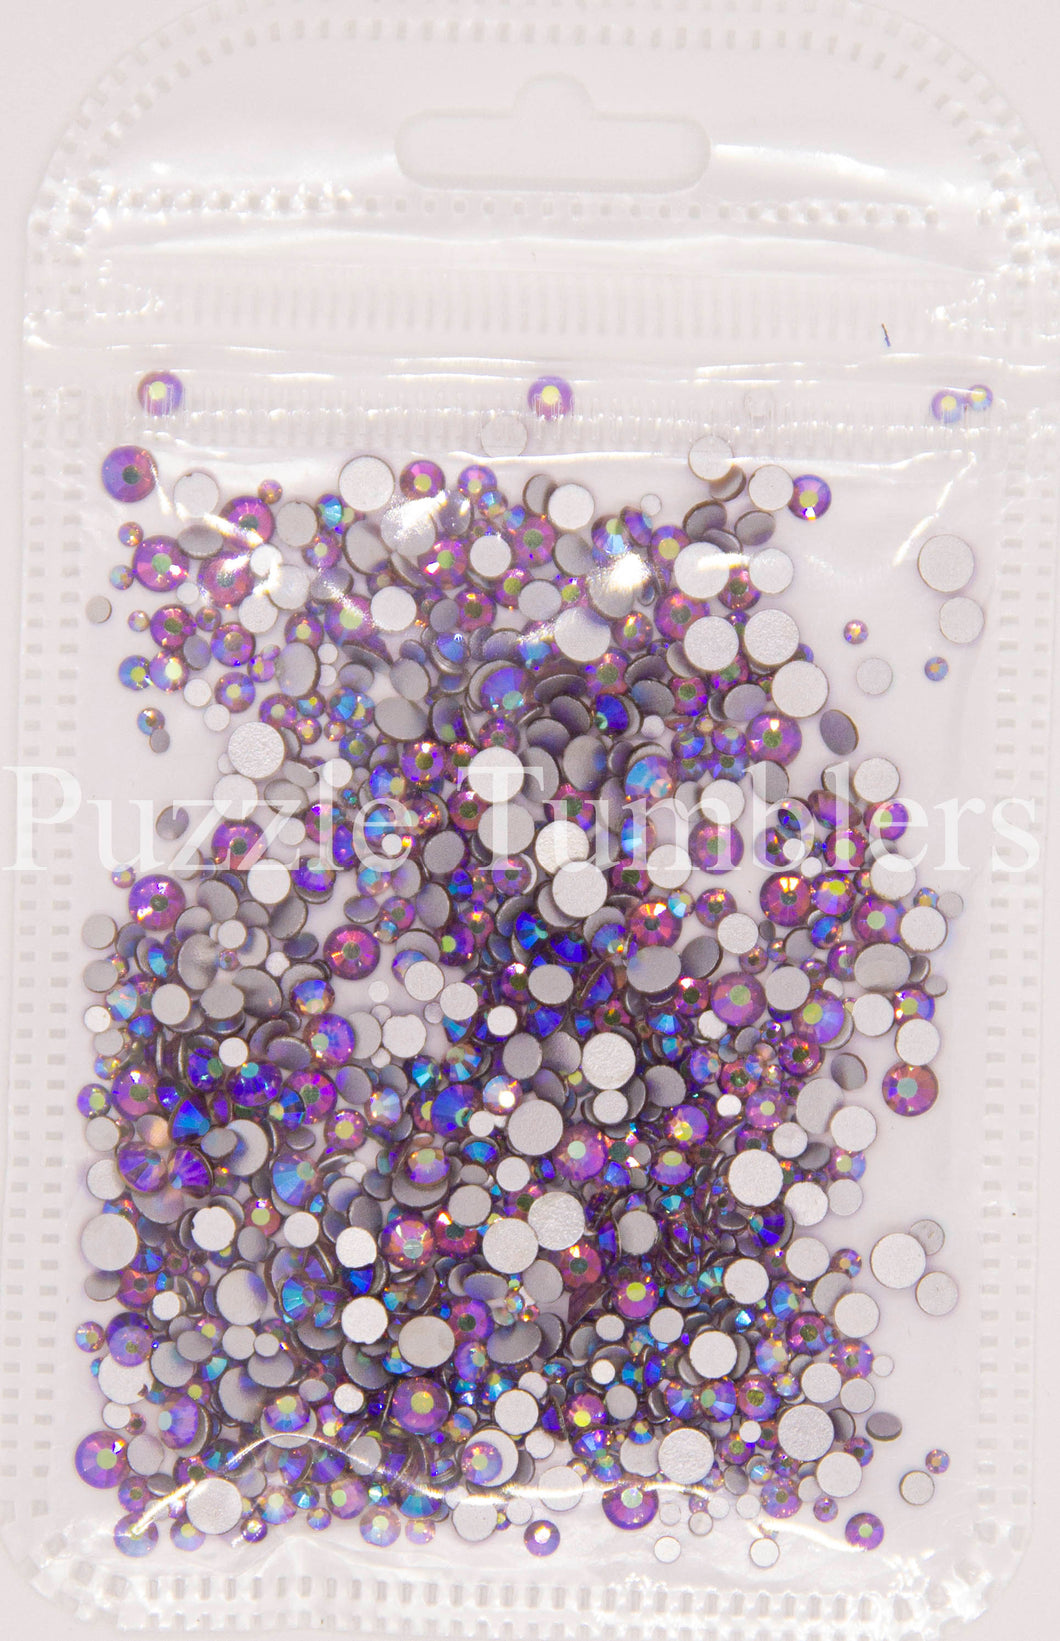 NEW Light Topaz 1000 Piece Variety Rhinestones AB/Clear Glass Crystal Stones (NON-Hot Fix) SS6-12